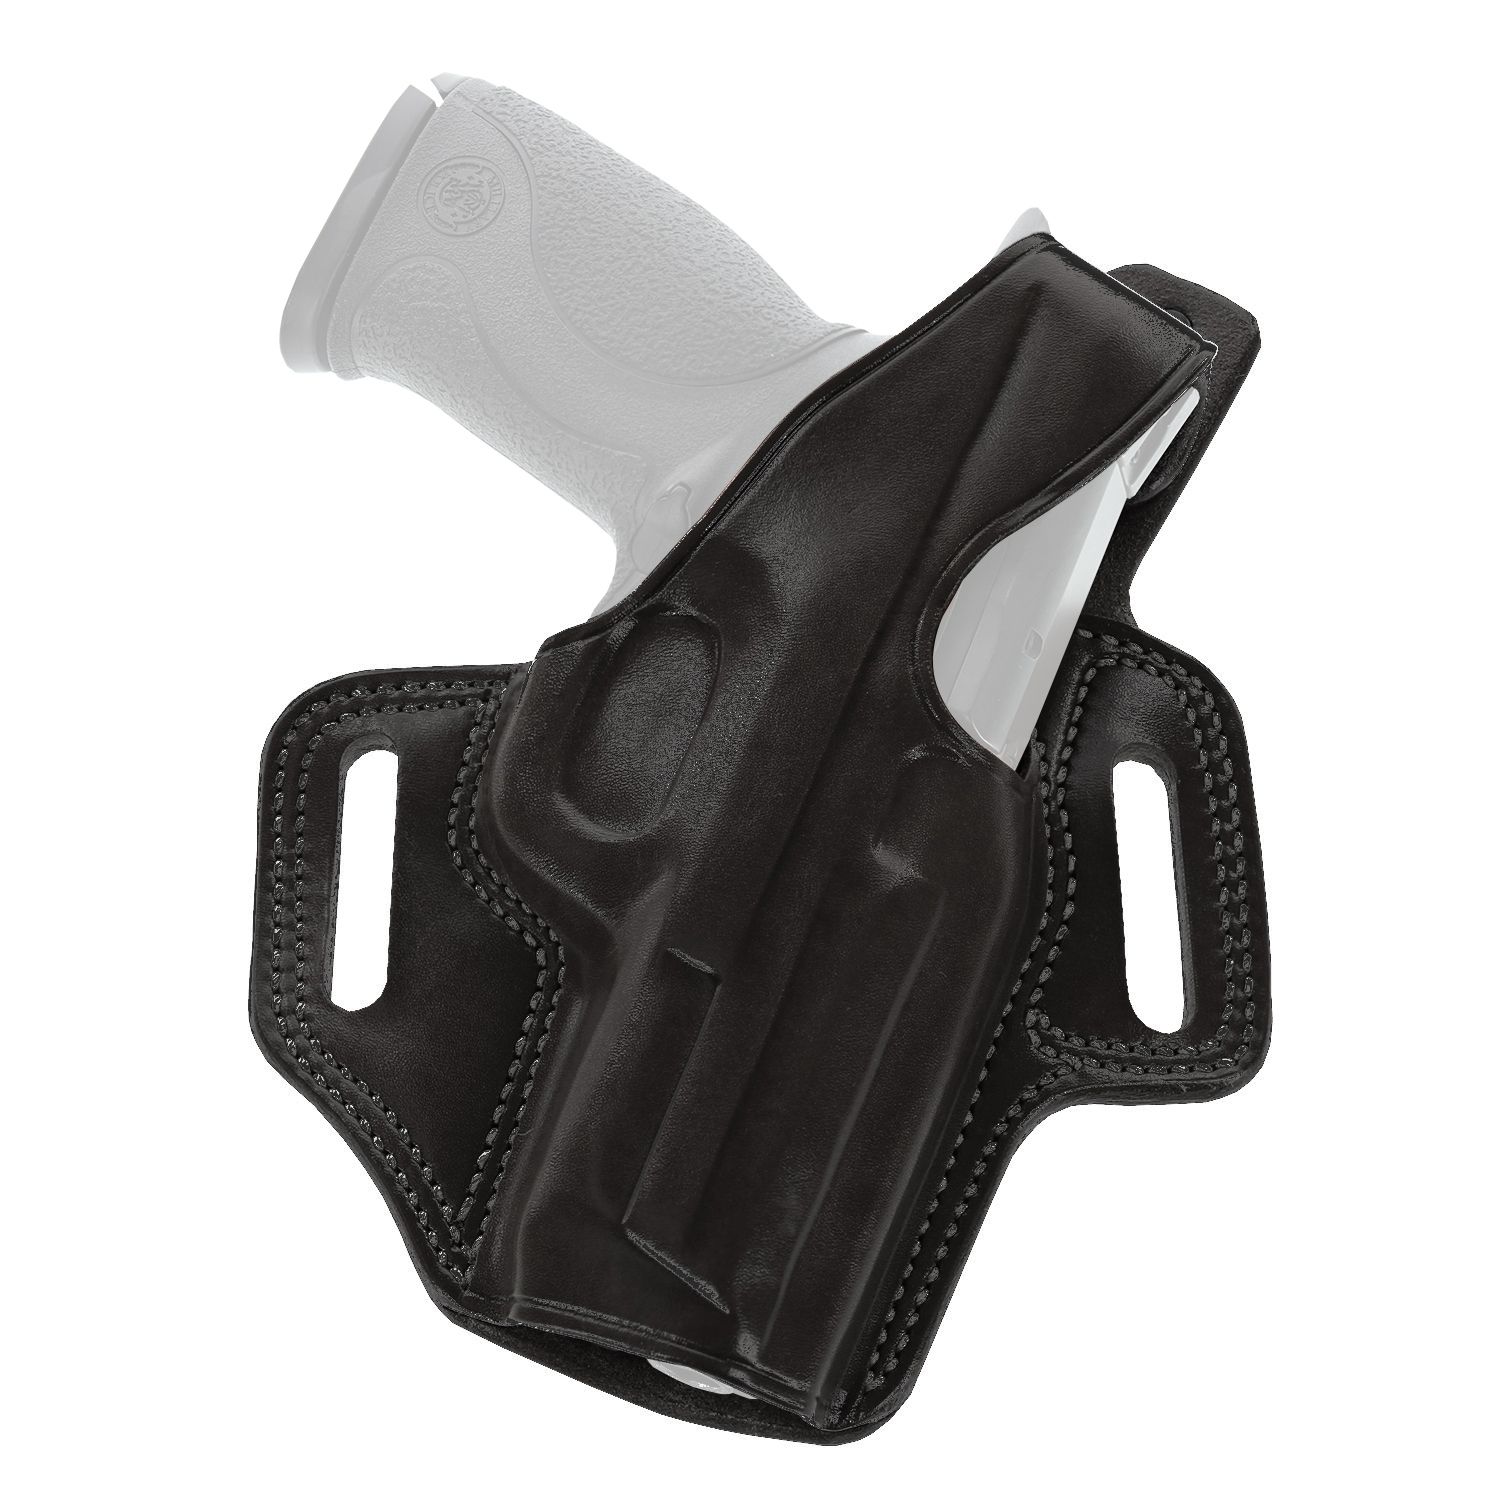 Galco Fletch Concealment Paddle Holster Right Hand Black - Walther P99 FL418B